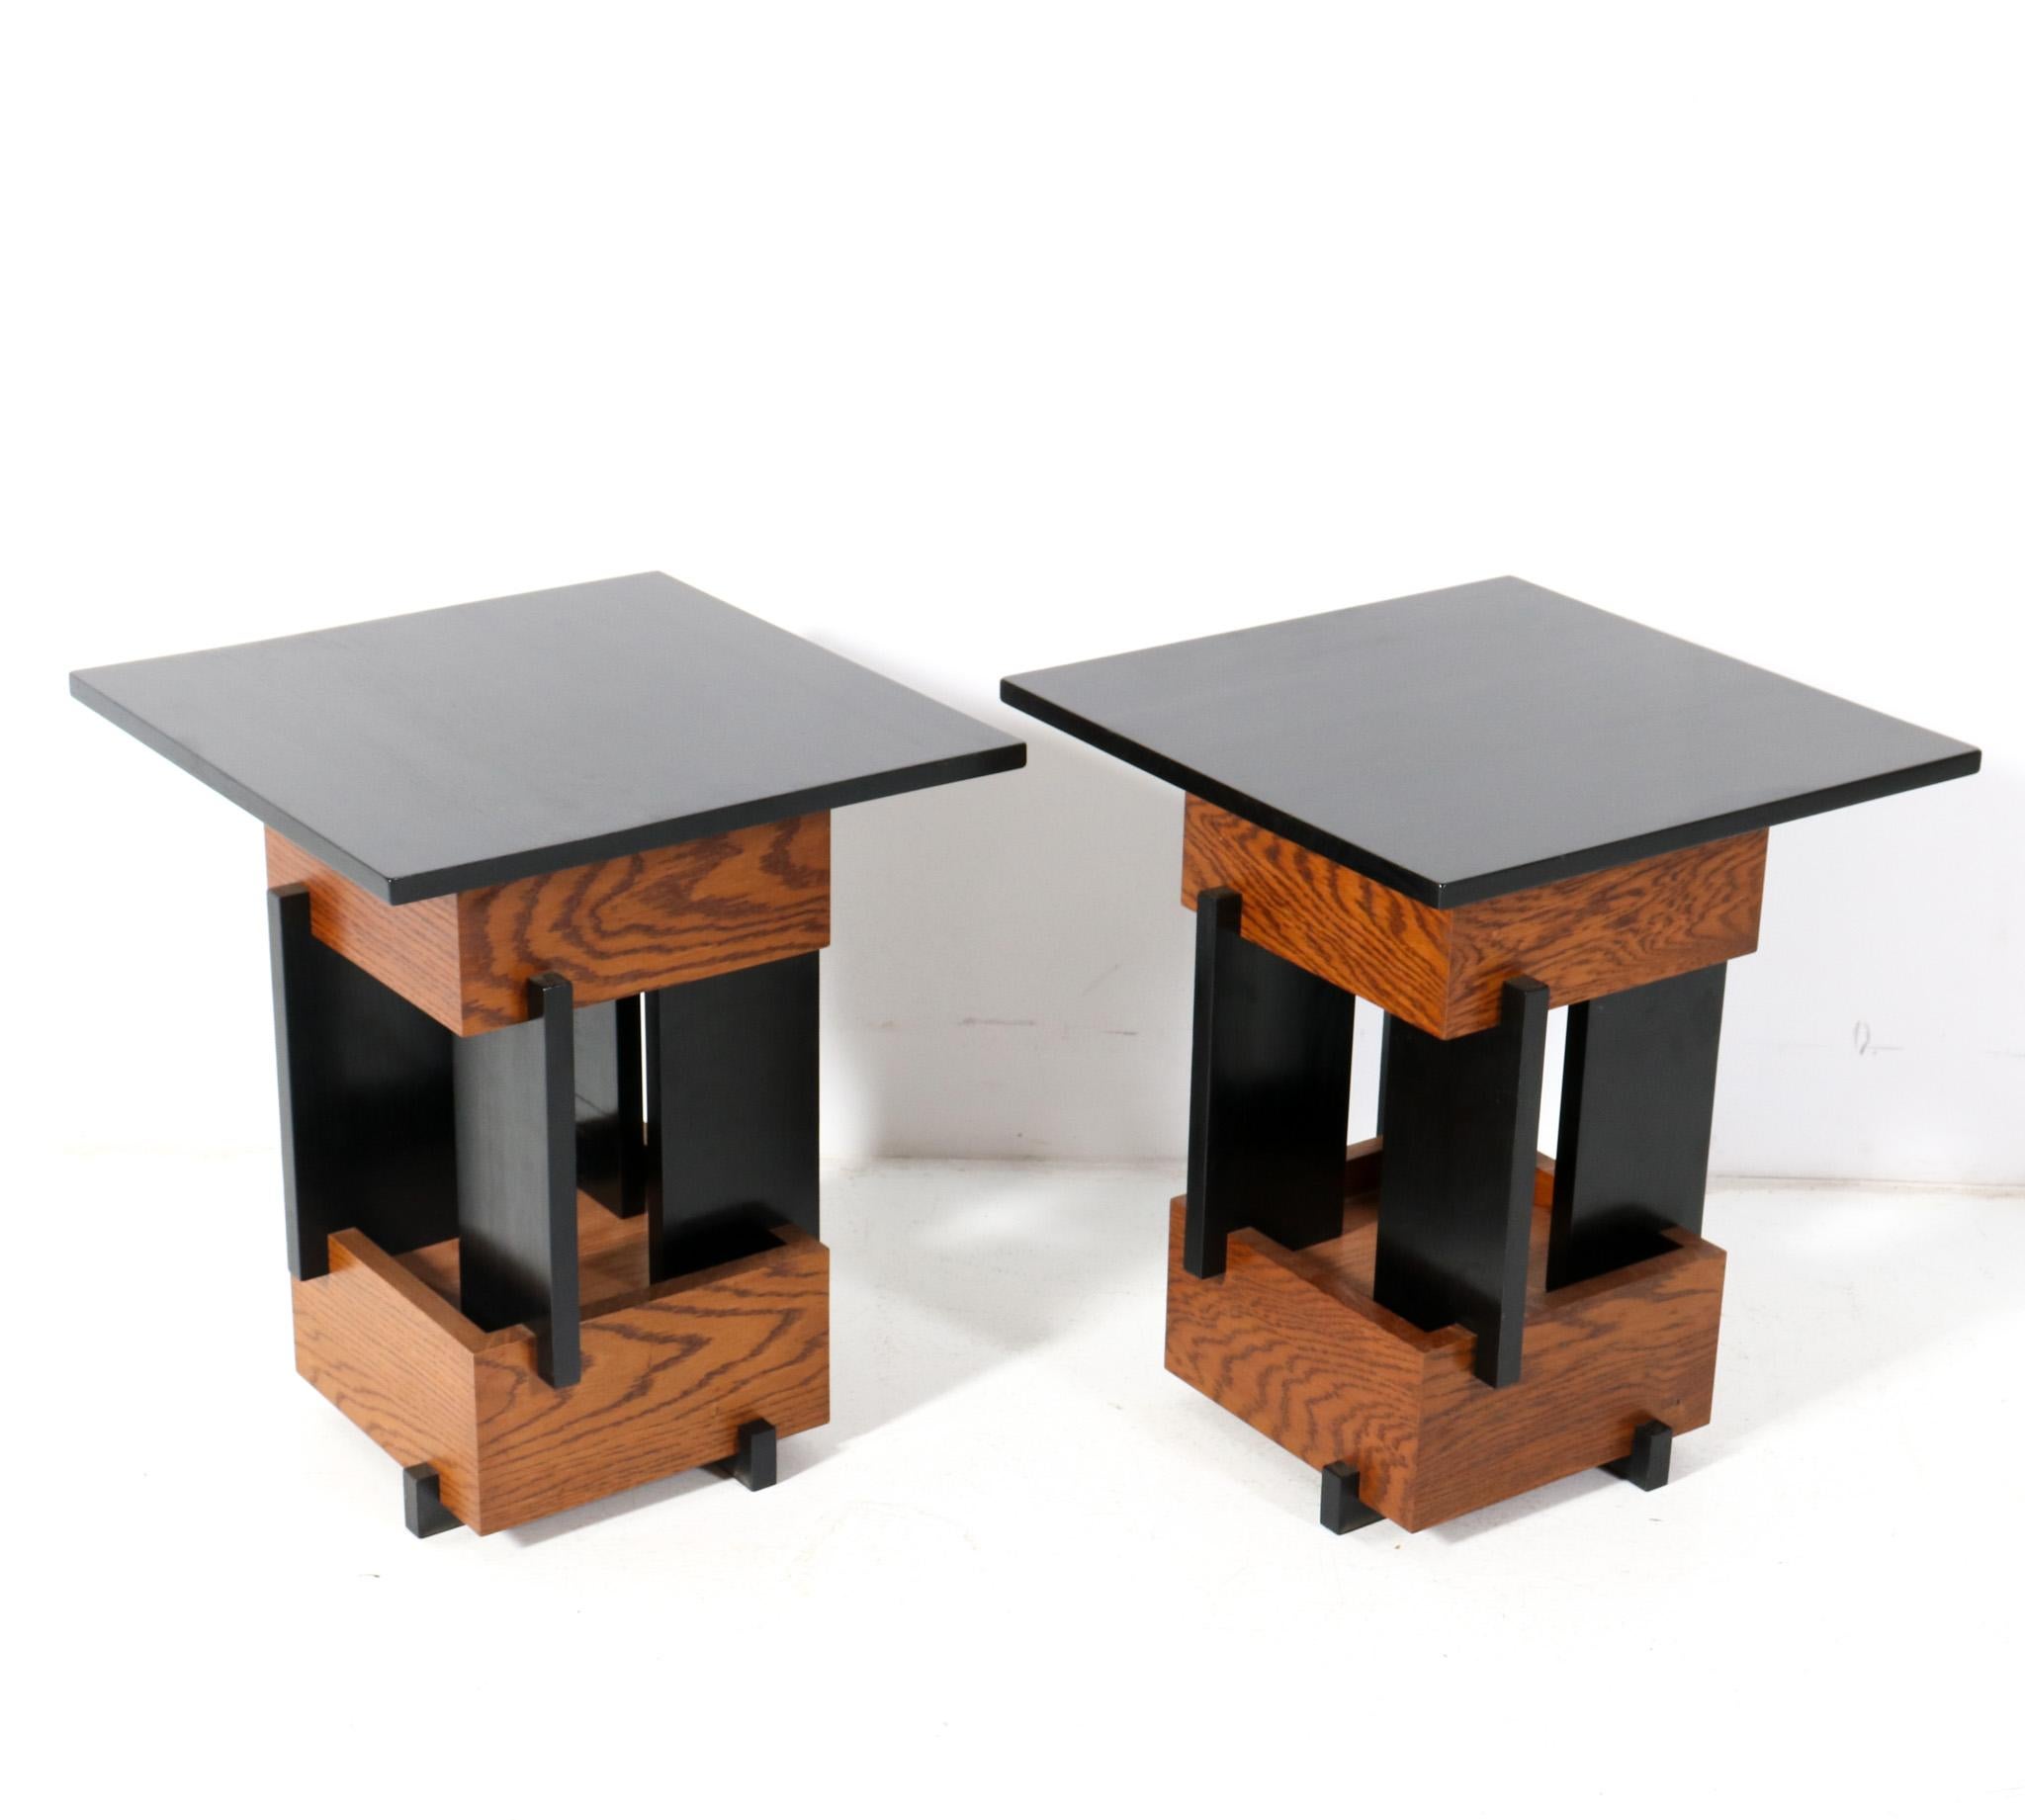 Magnificent and rare pair of handmade Art Deco Modernist side tables.
The original design is by Cor Alons around the 1930s but this pair is handmade by the cabinet makers of Amsterdam Modernism in February 2023!
Solid oak frames with black